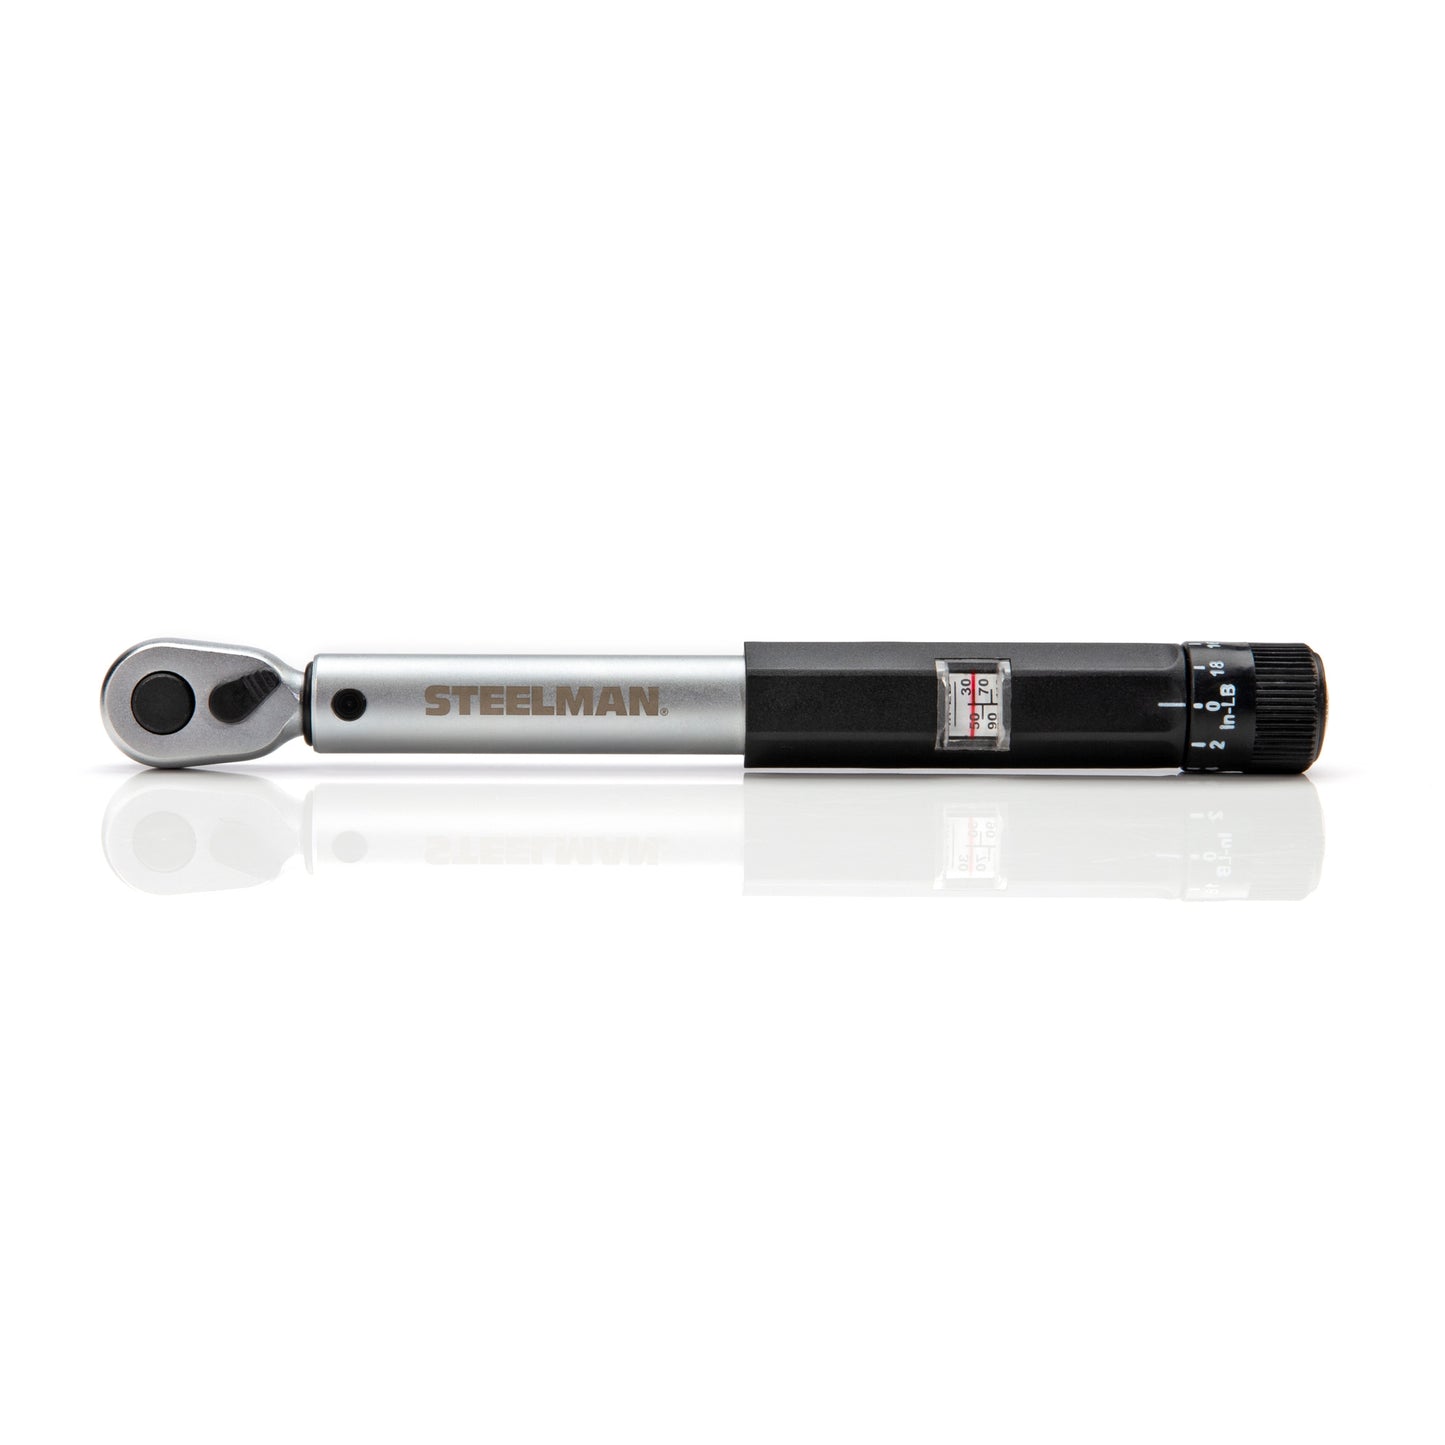 1/4-inch Drive 30-150 in-lb Micro-Adjustable Torque Wrench